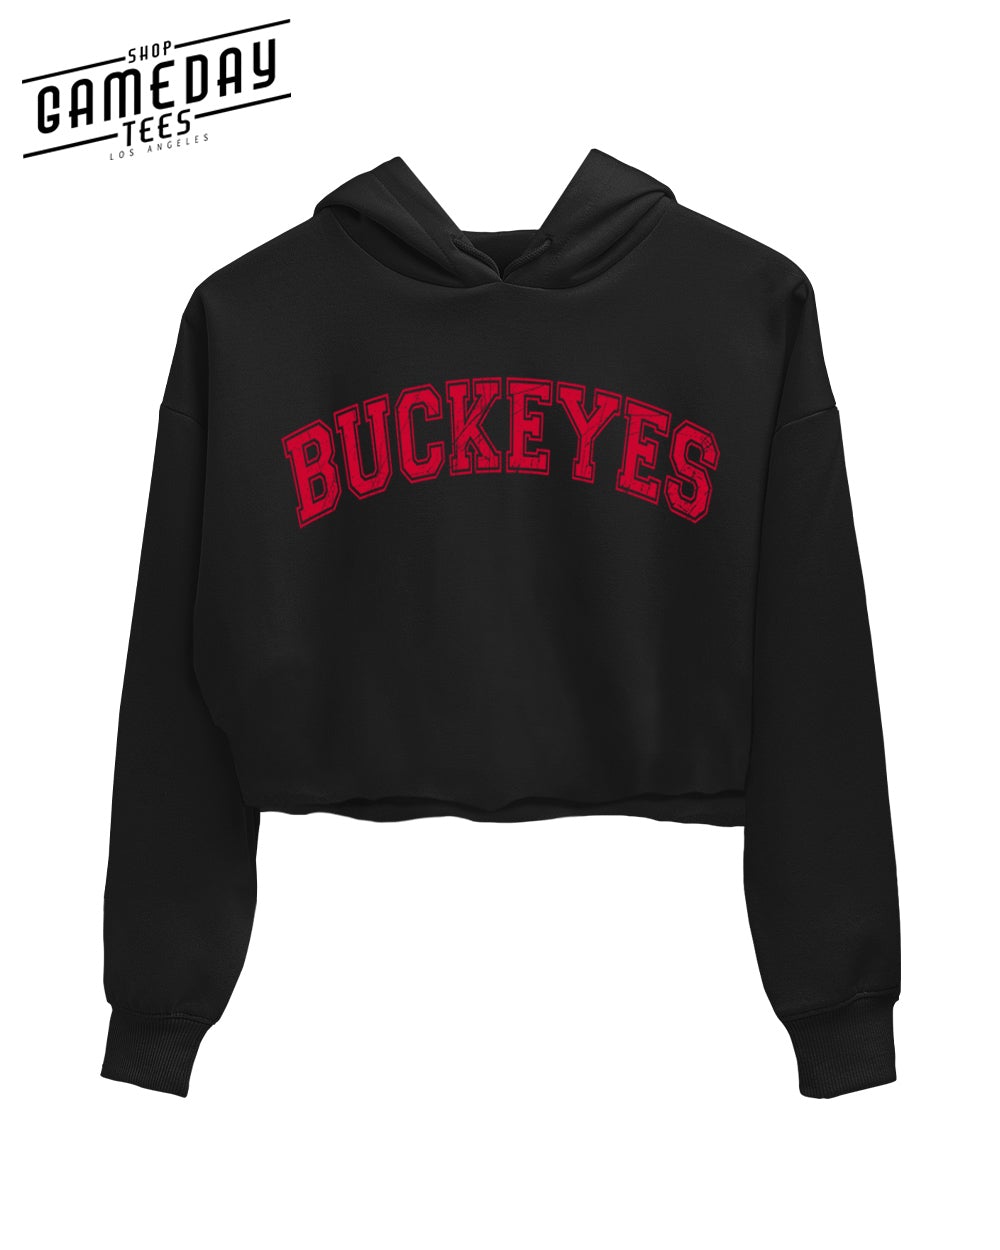 Ohio State University College Student Gameday Tees Buckeyes Crop Hoodie Collection Perfect OSU College University Game Day Clothing Black1